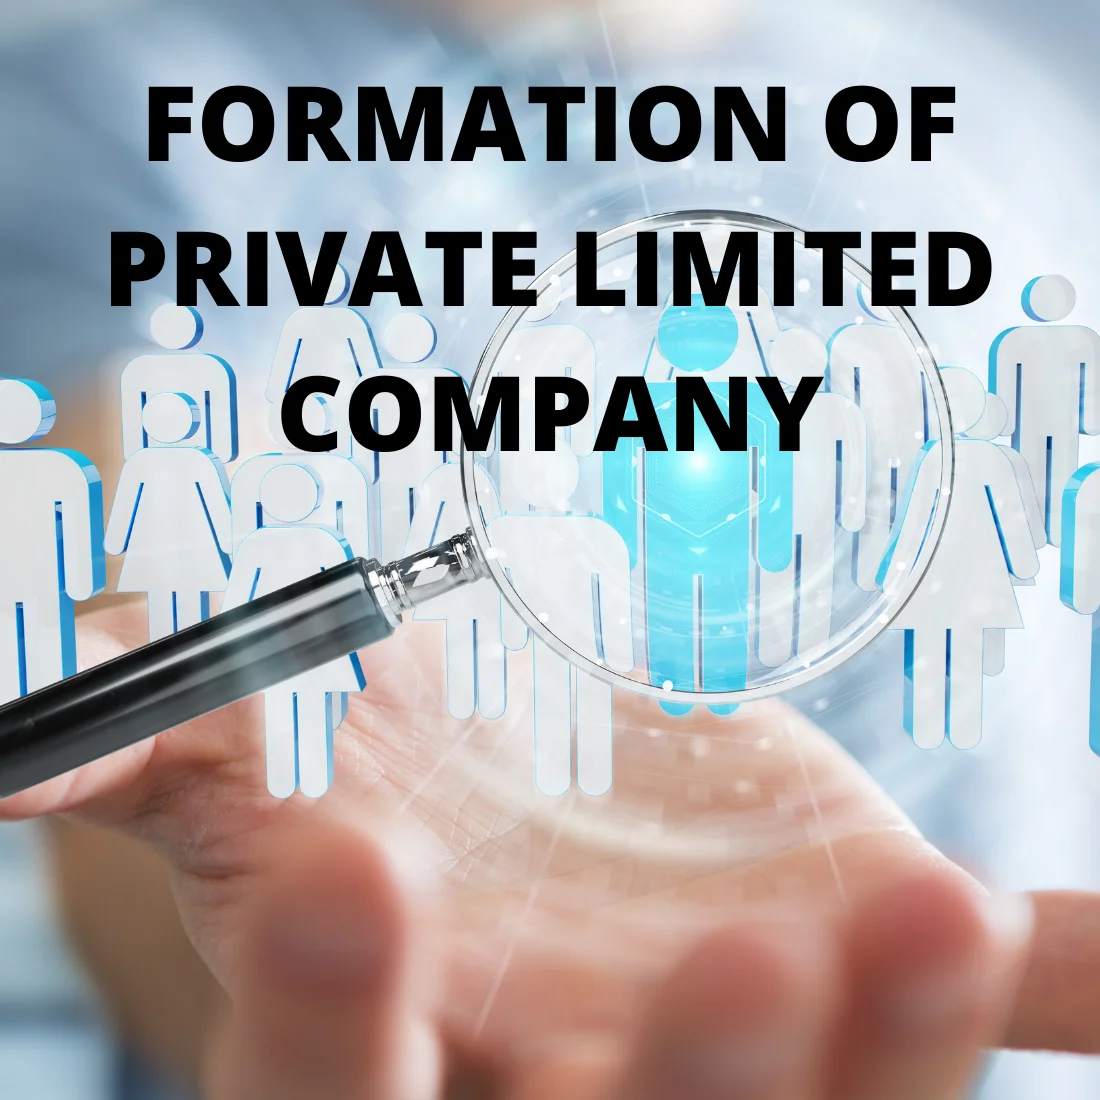 Formation of Private Limited Company